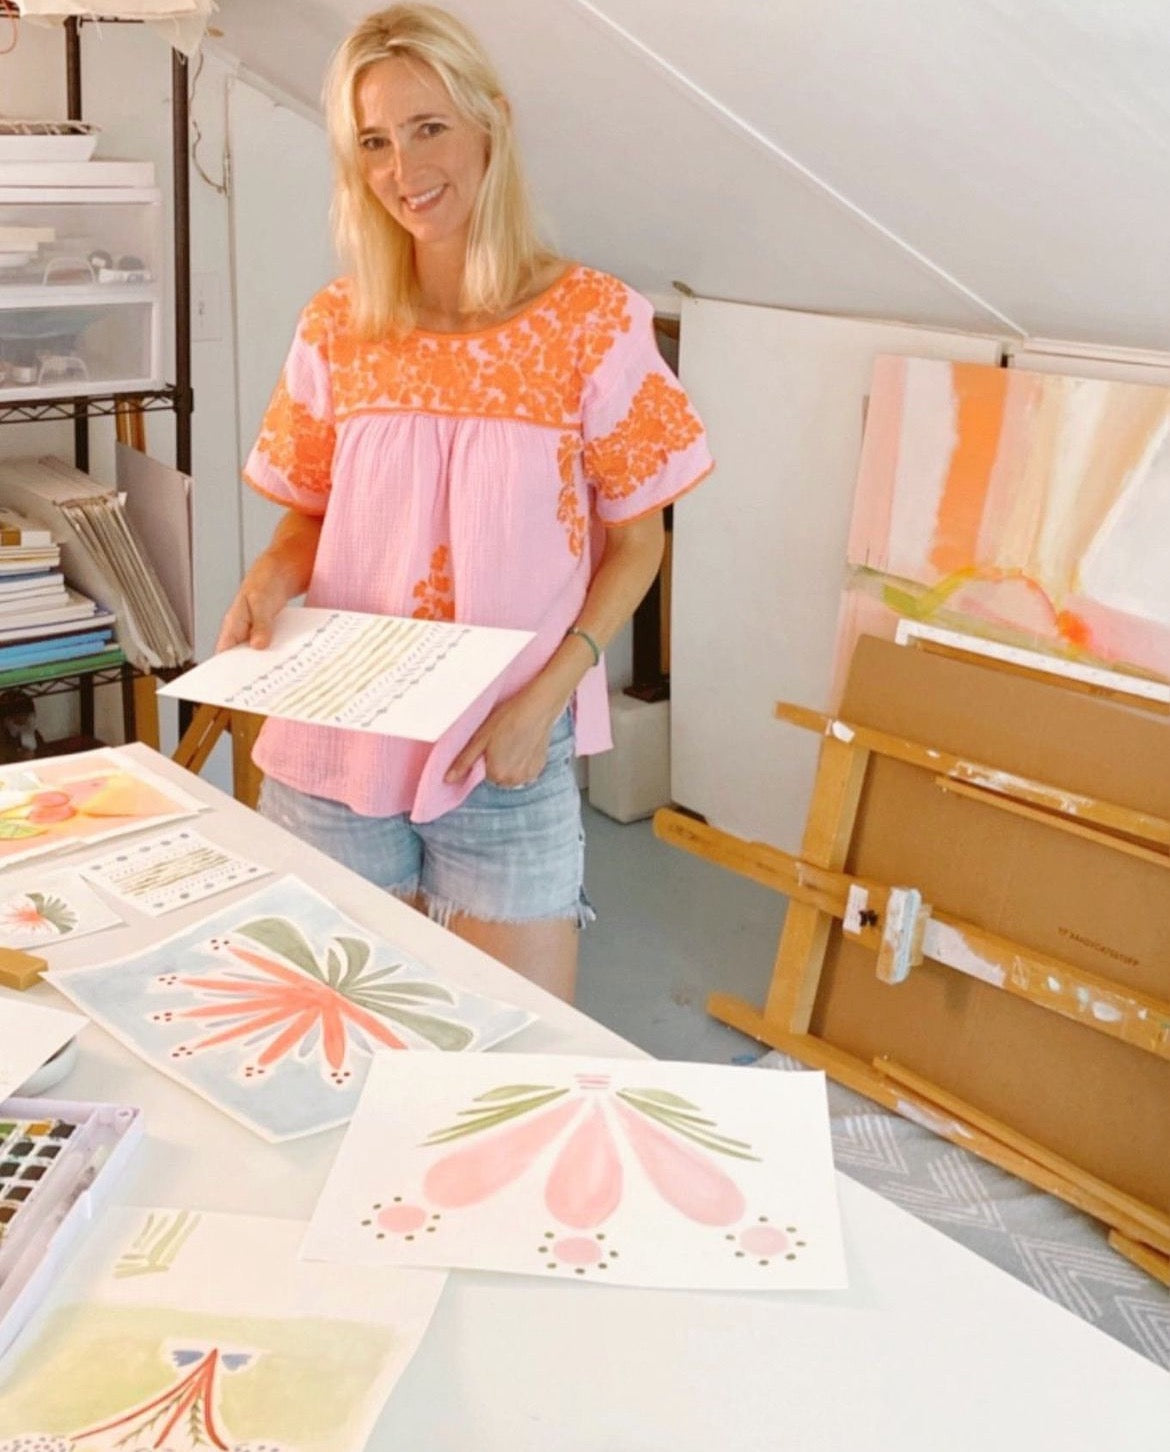 Blonde woman in pink and orange top and jean shorts standing in her art studio looking at floral watercolor artwork